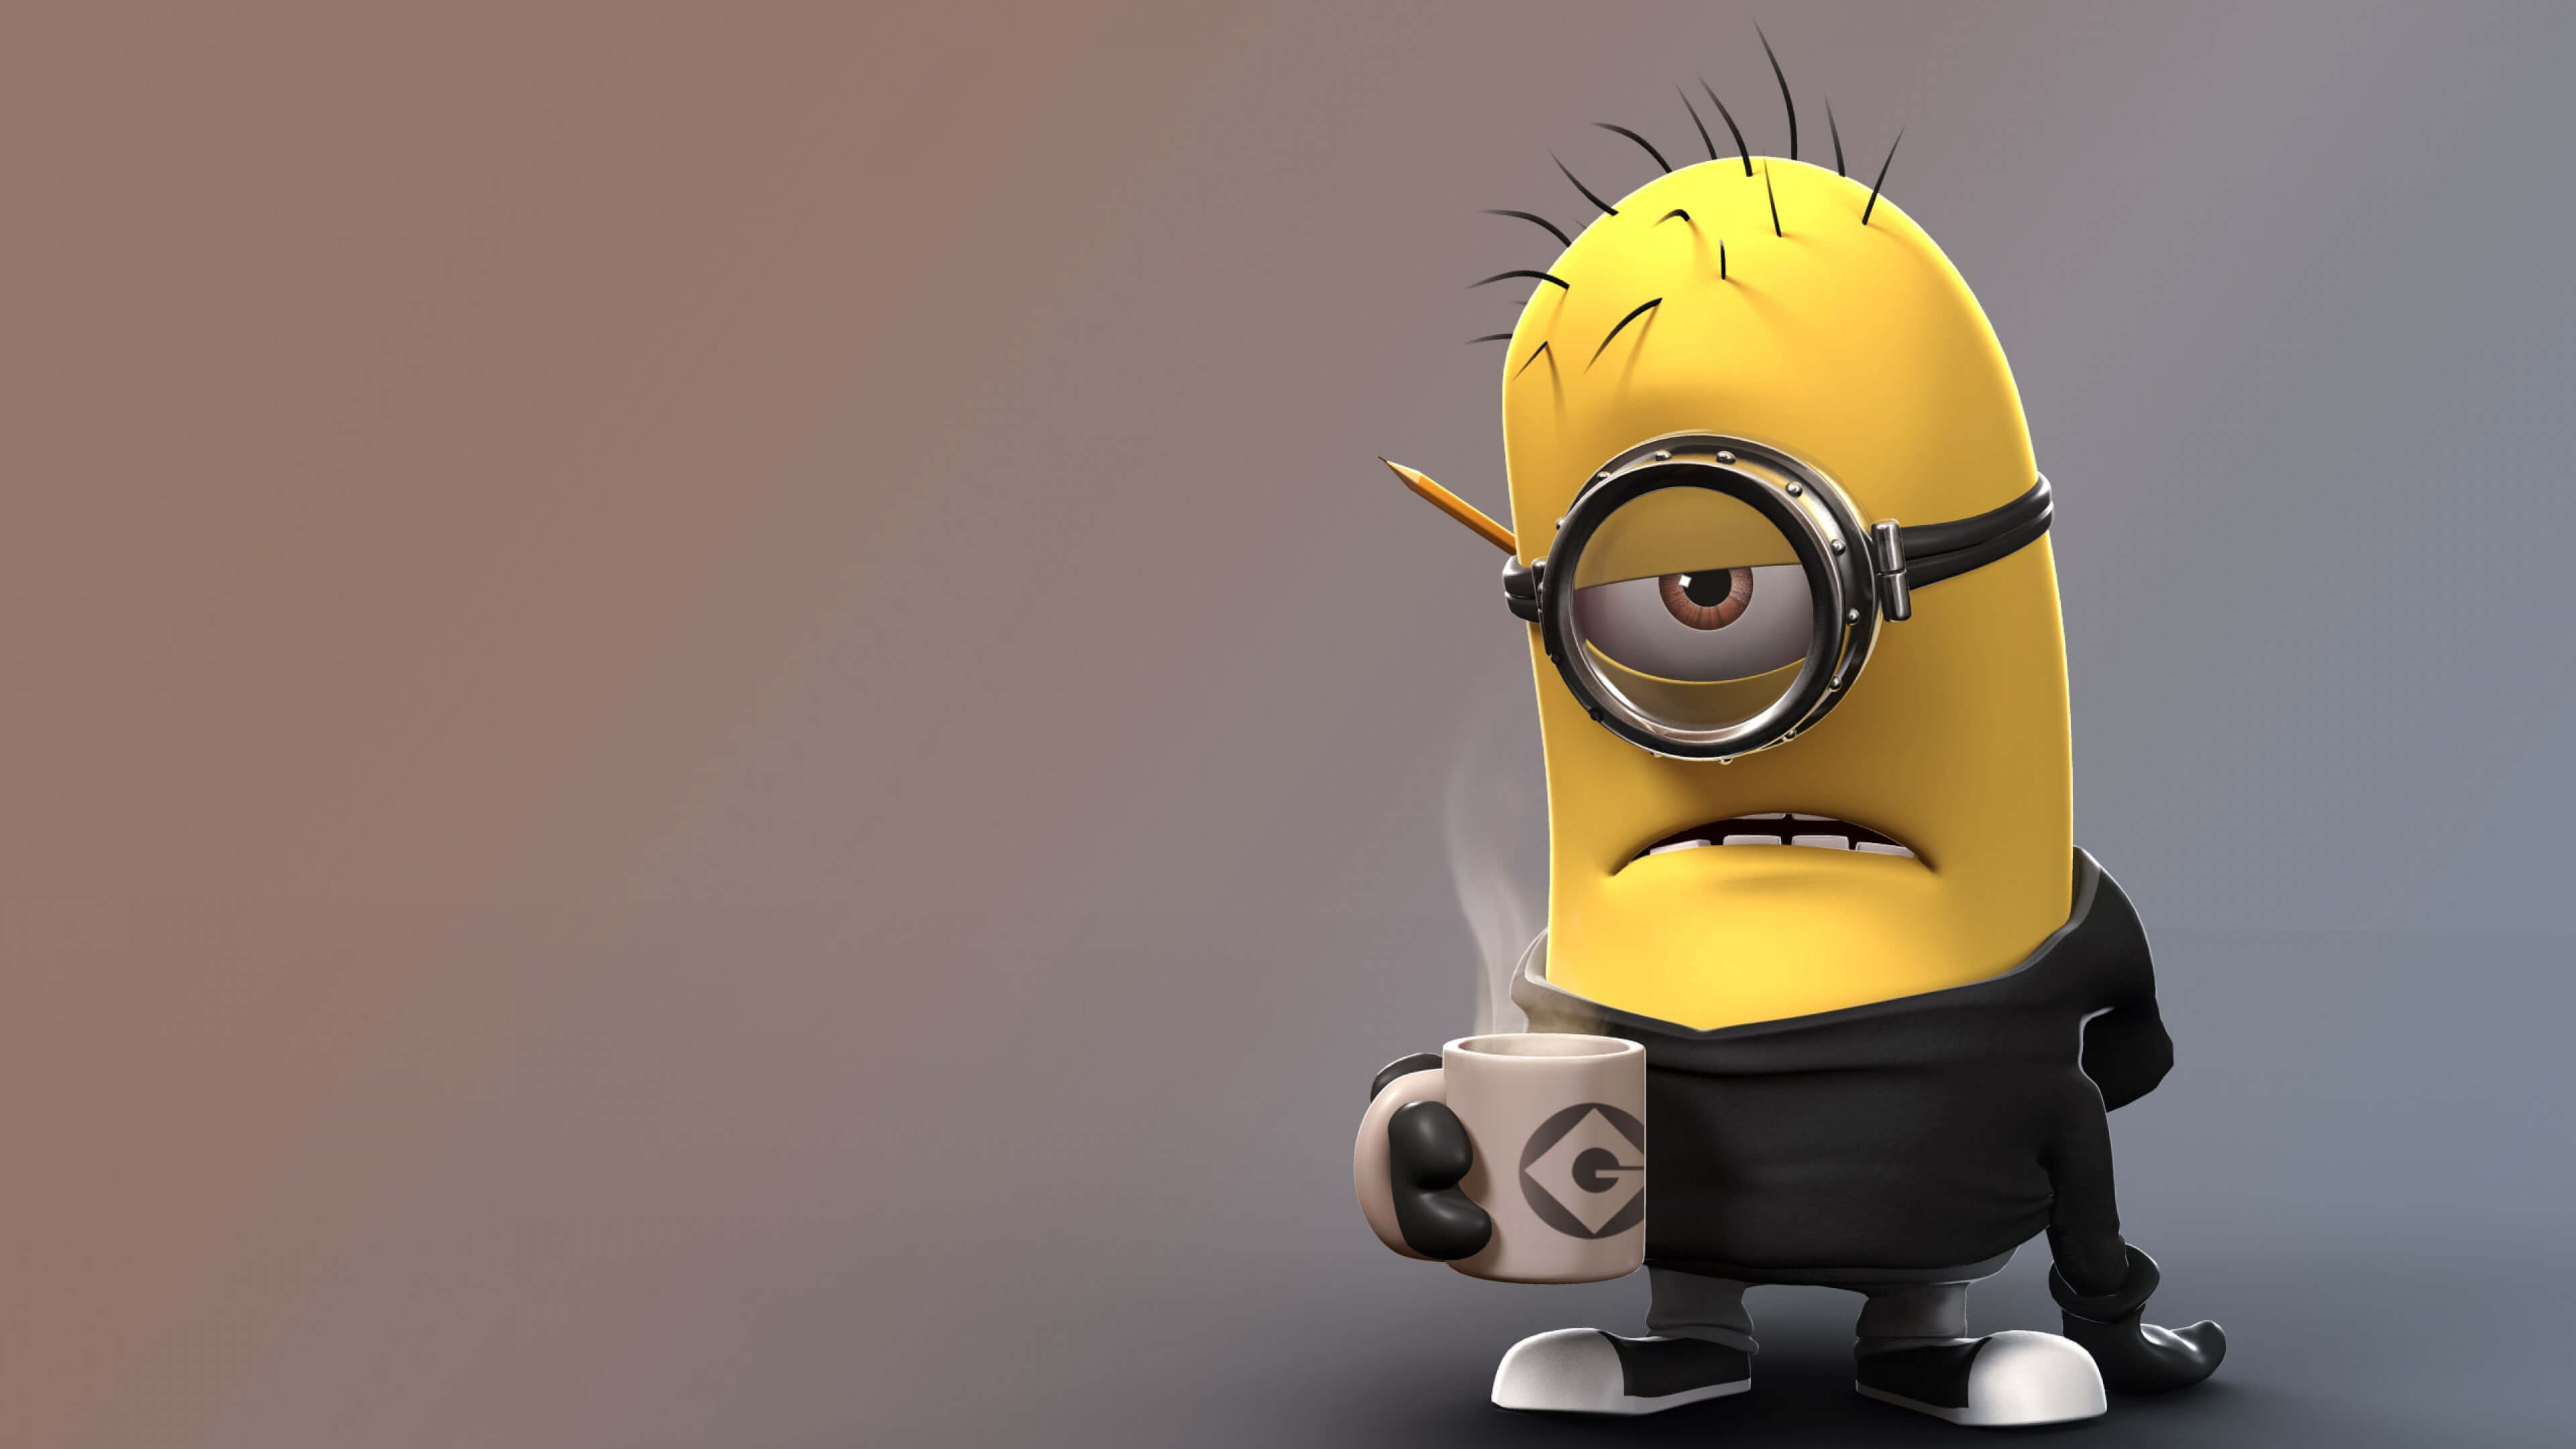 [cartoons] A Cute Collection Of Despicable Me 2 Minions - Ill Minion - HD Wallpaper 